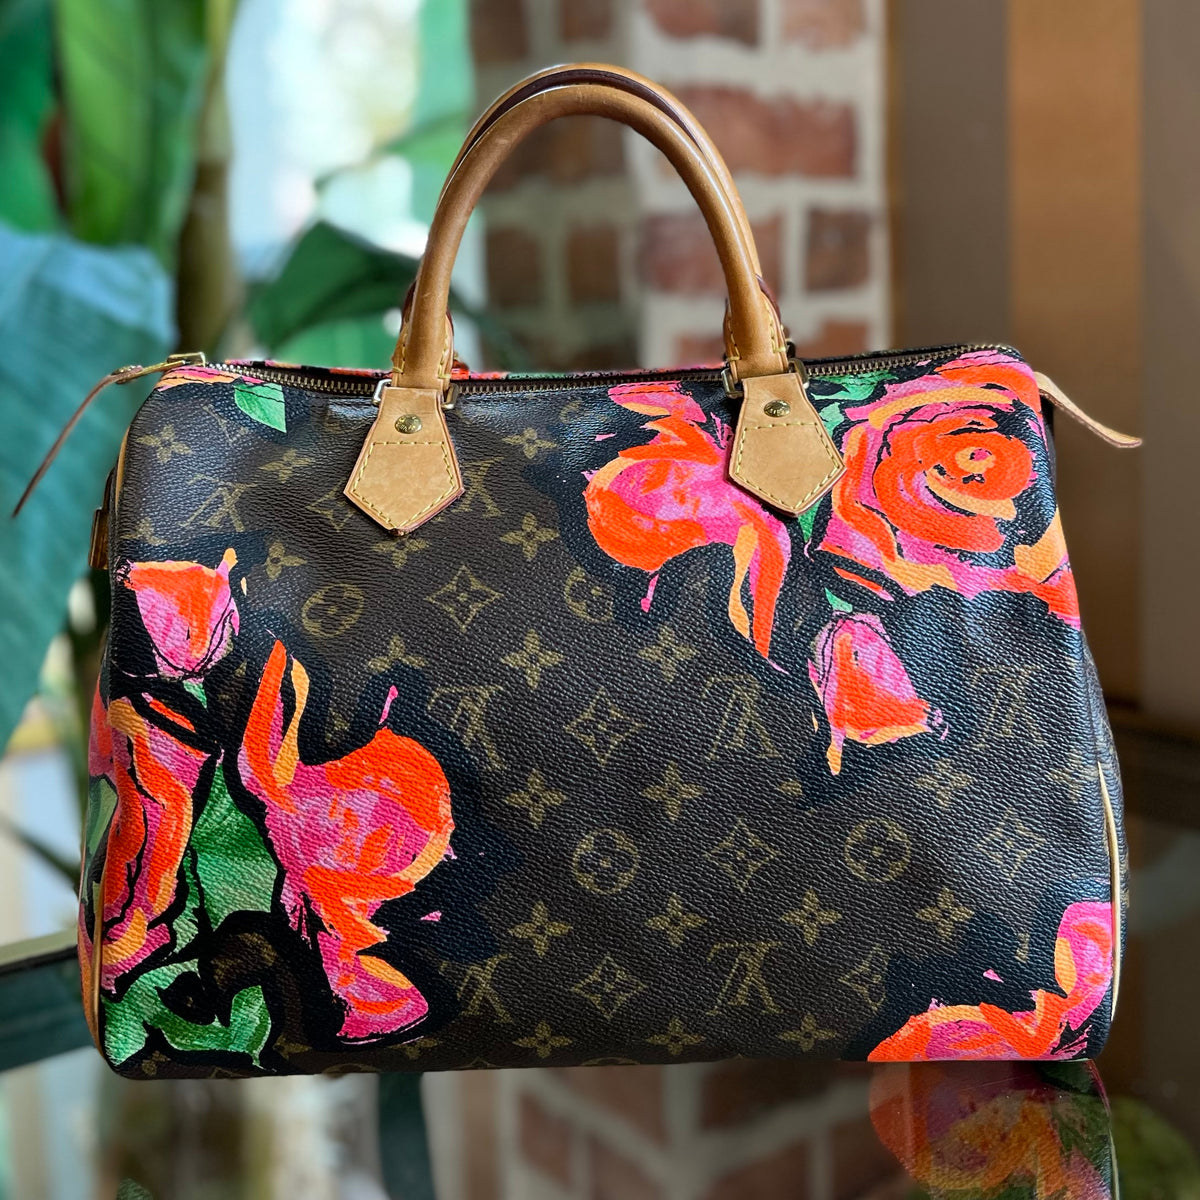 LOUIS VUITTON Limited Edition Stephen Sprouse Roses Speedy 30 Bag